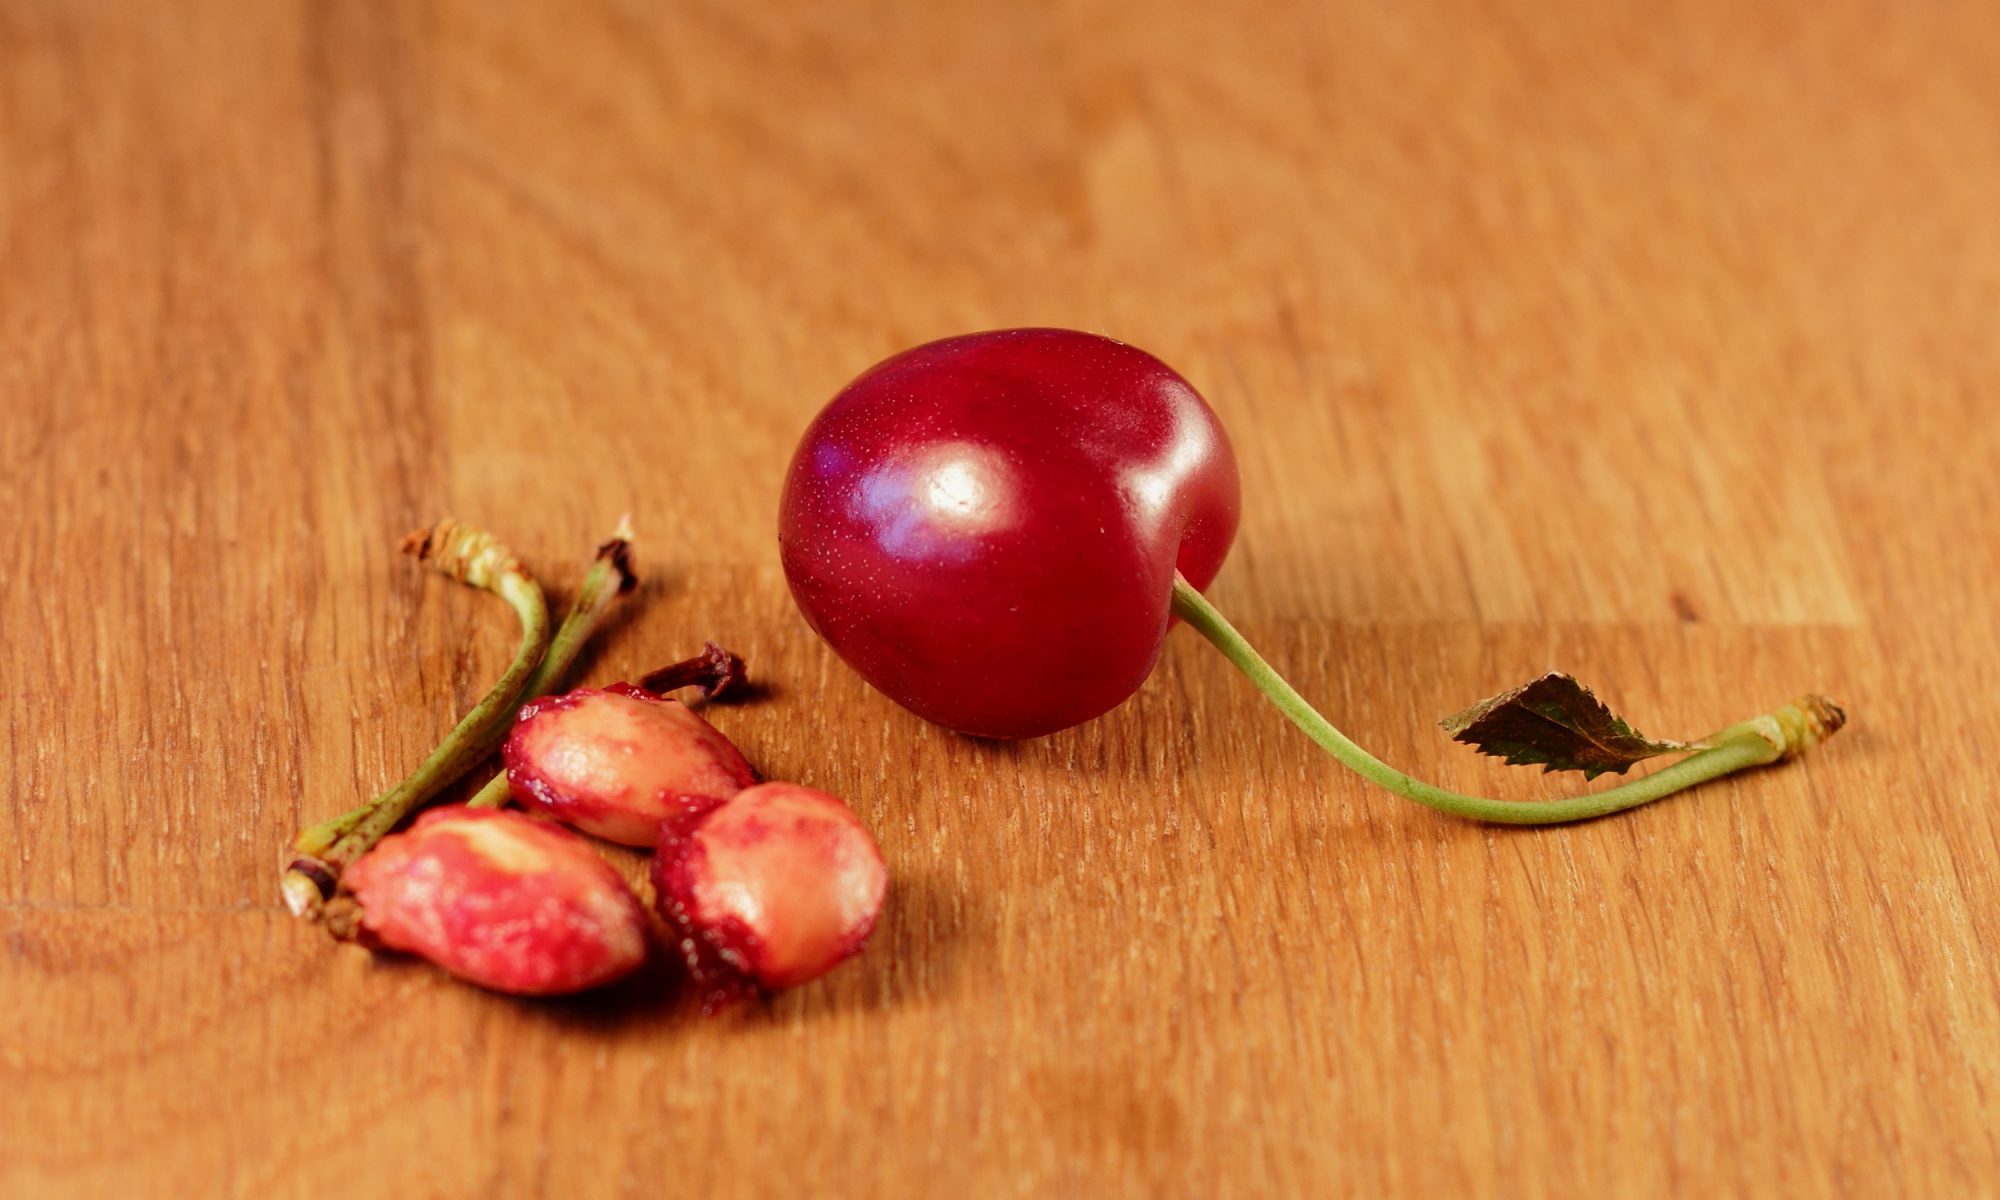 Things people stuck up their nose - pits of cherries